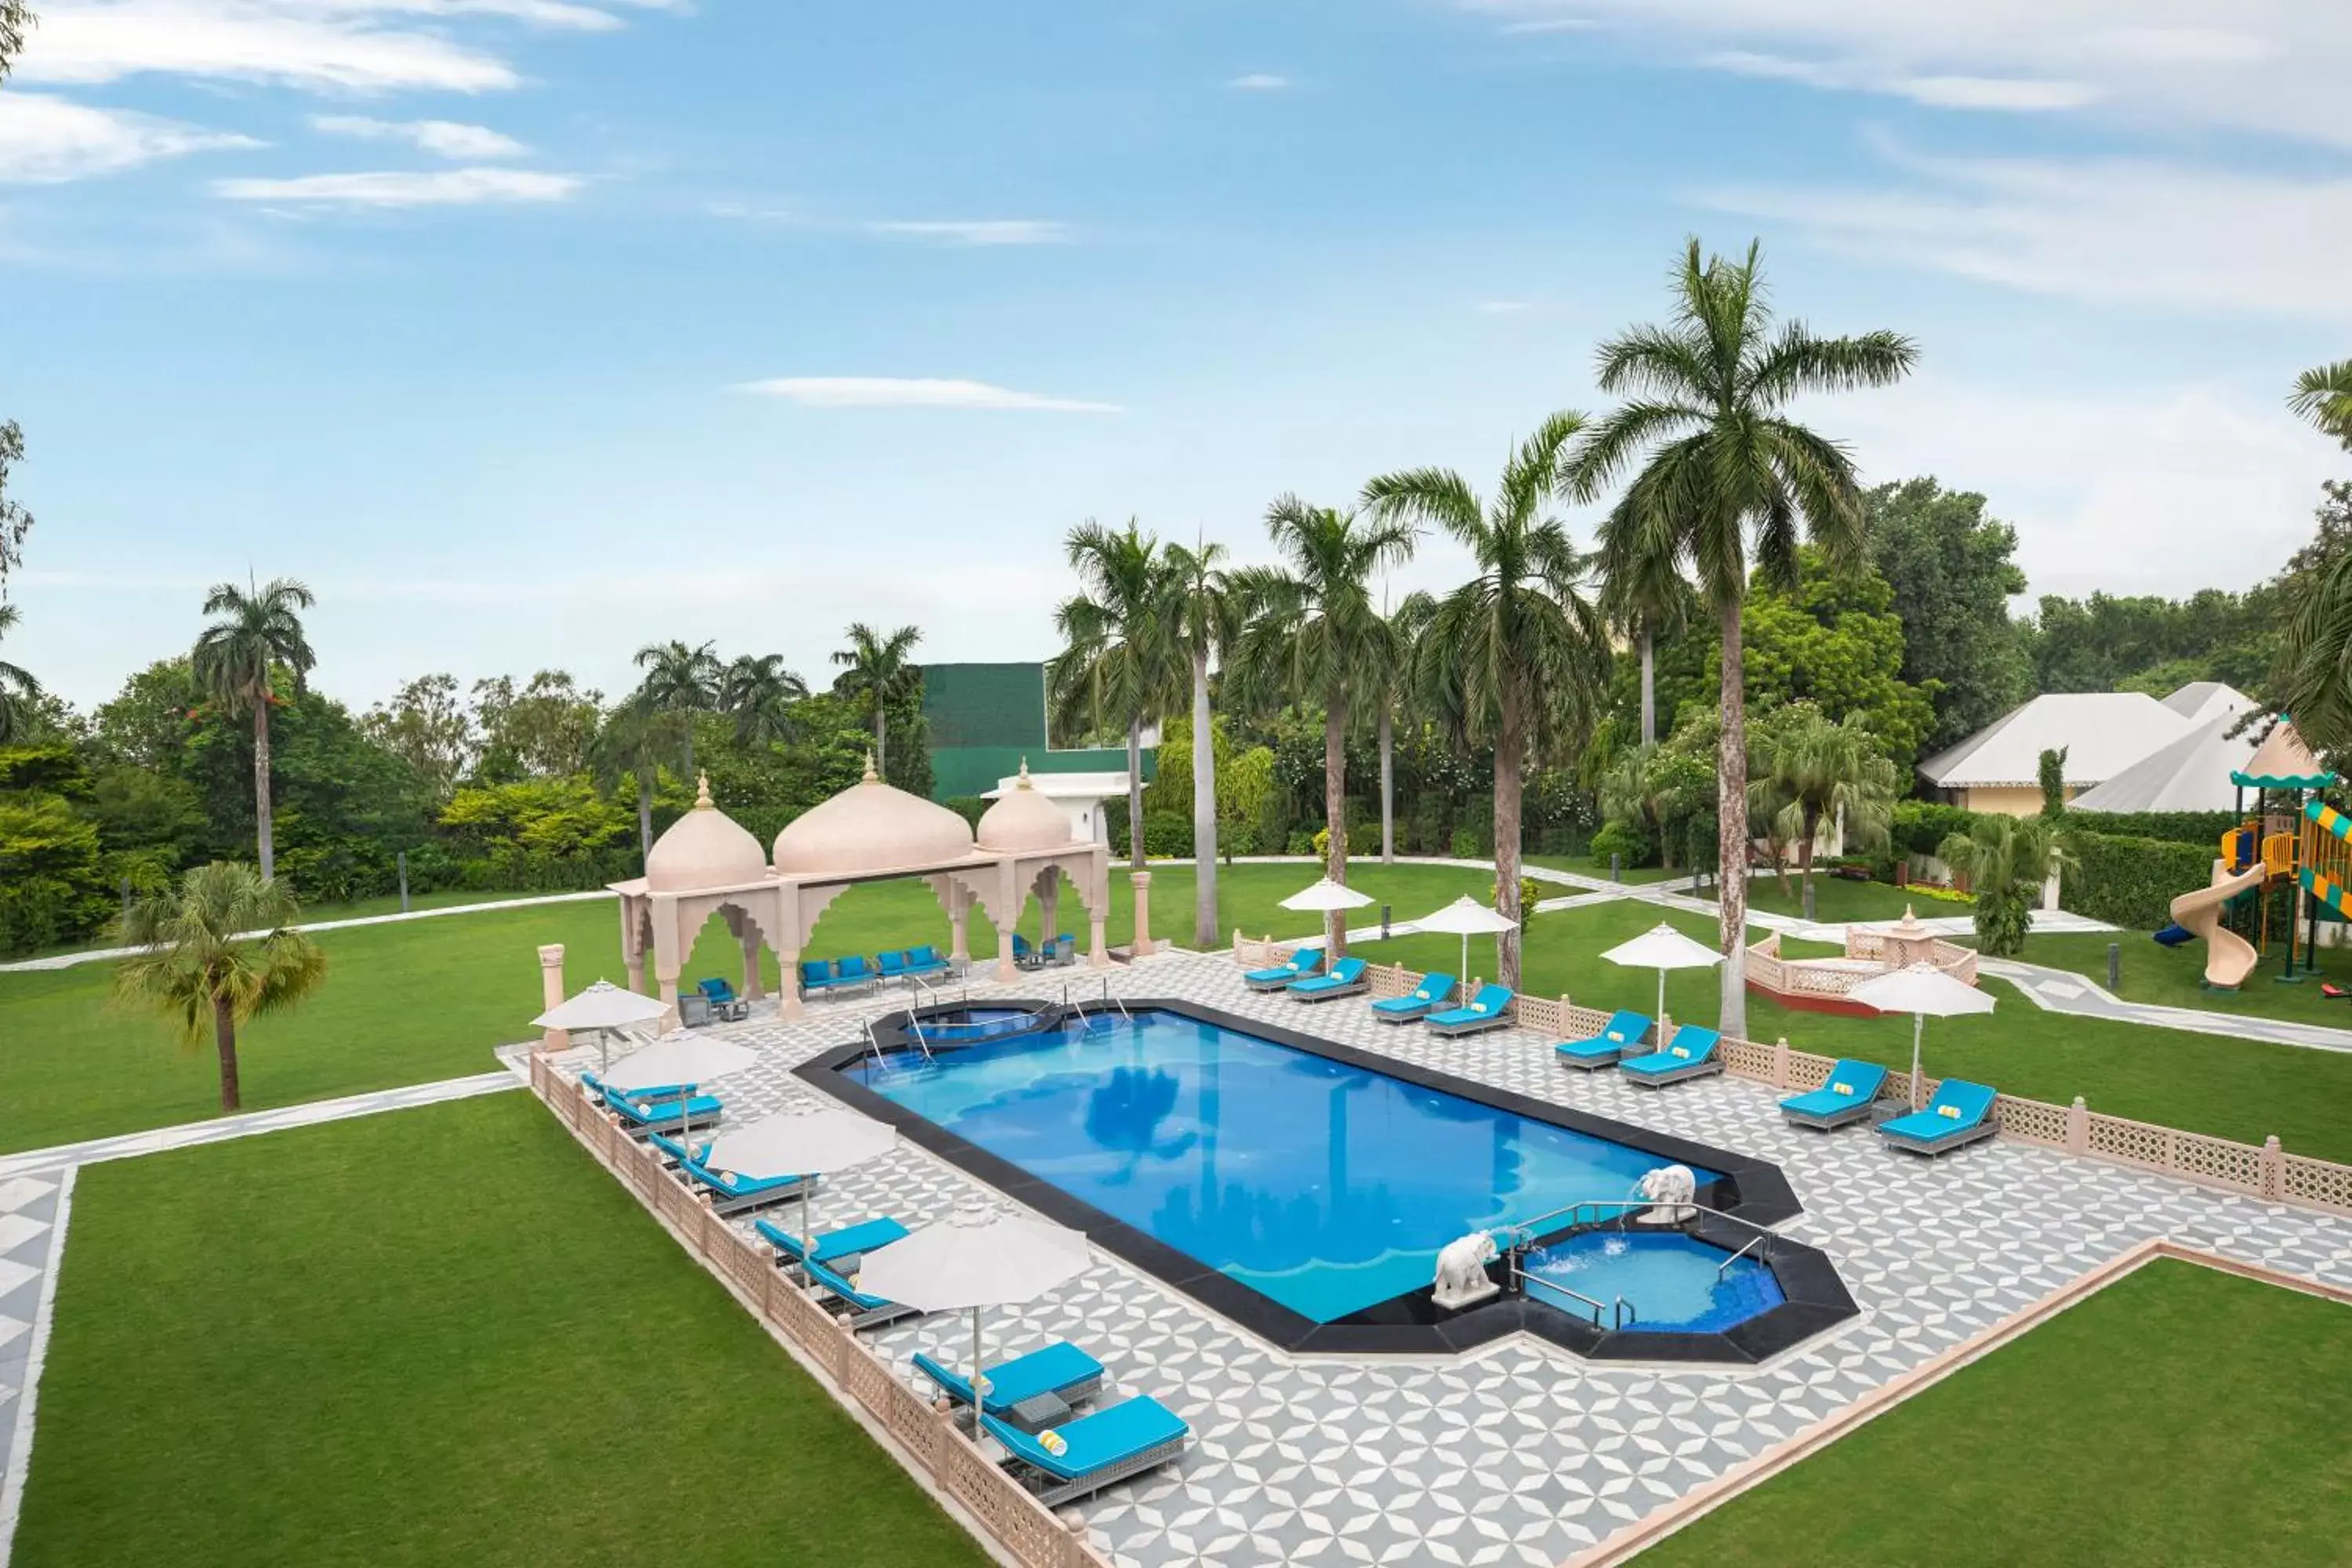 Swimming pool, Pool View in Tajview,Agra-IHCL SeleQtions